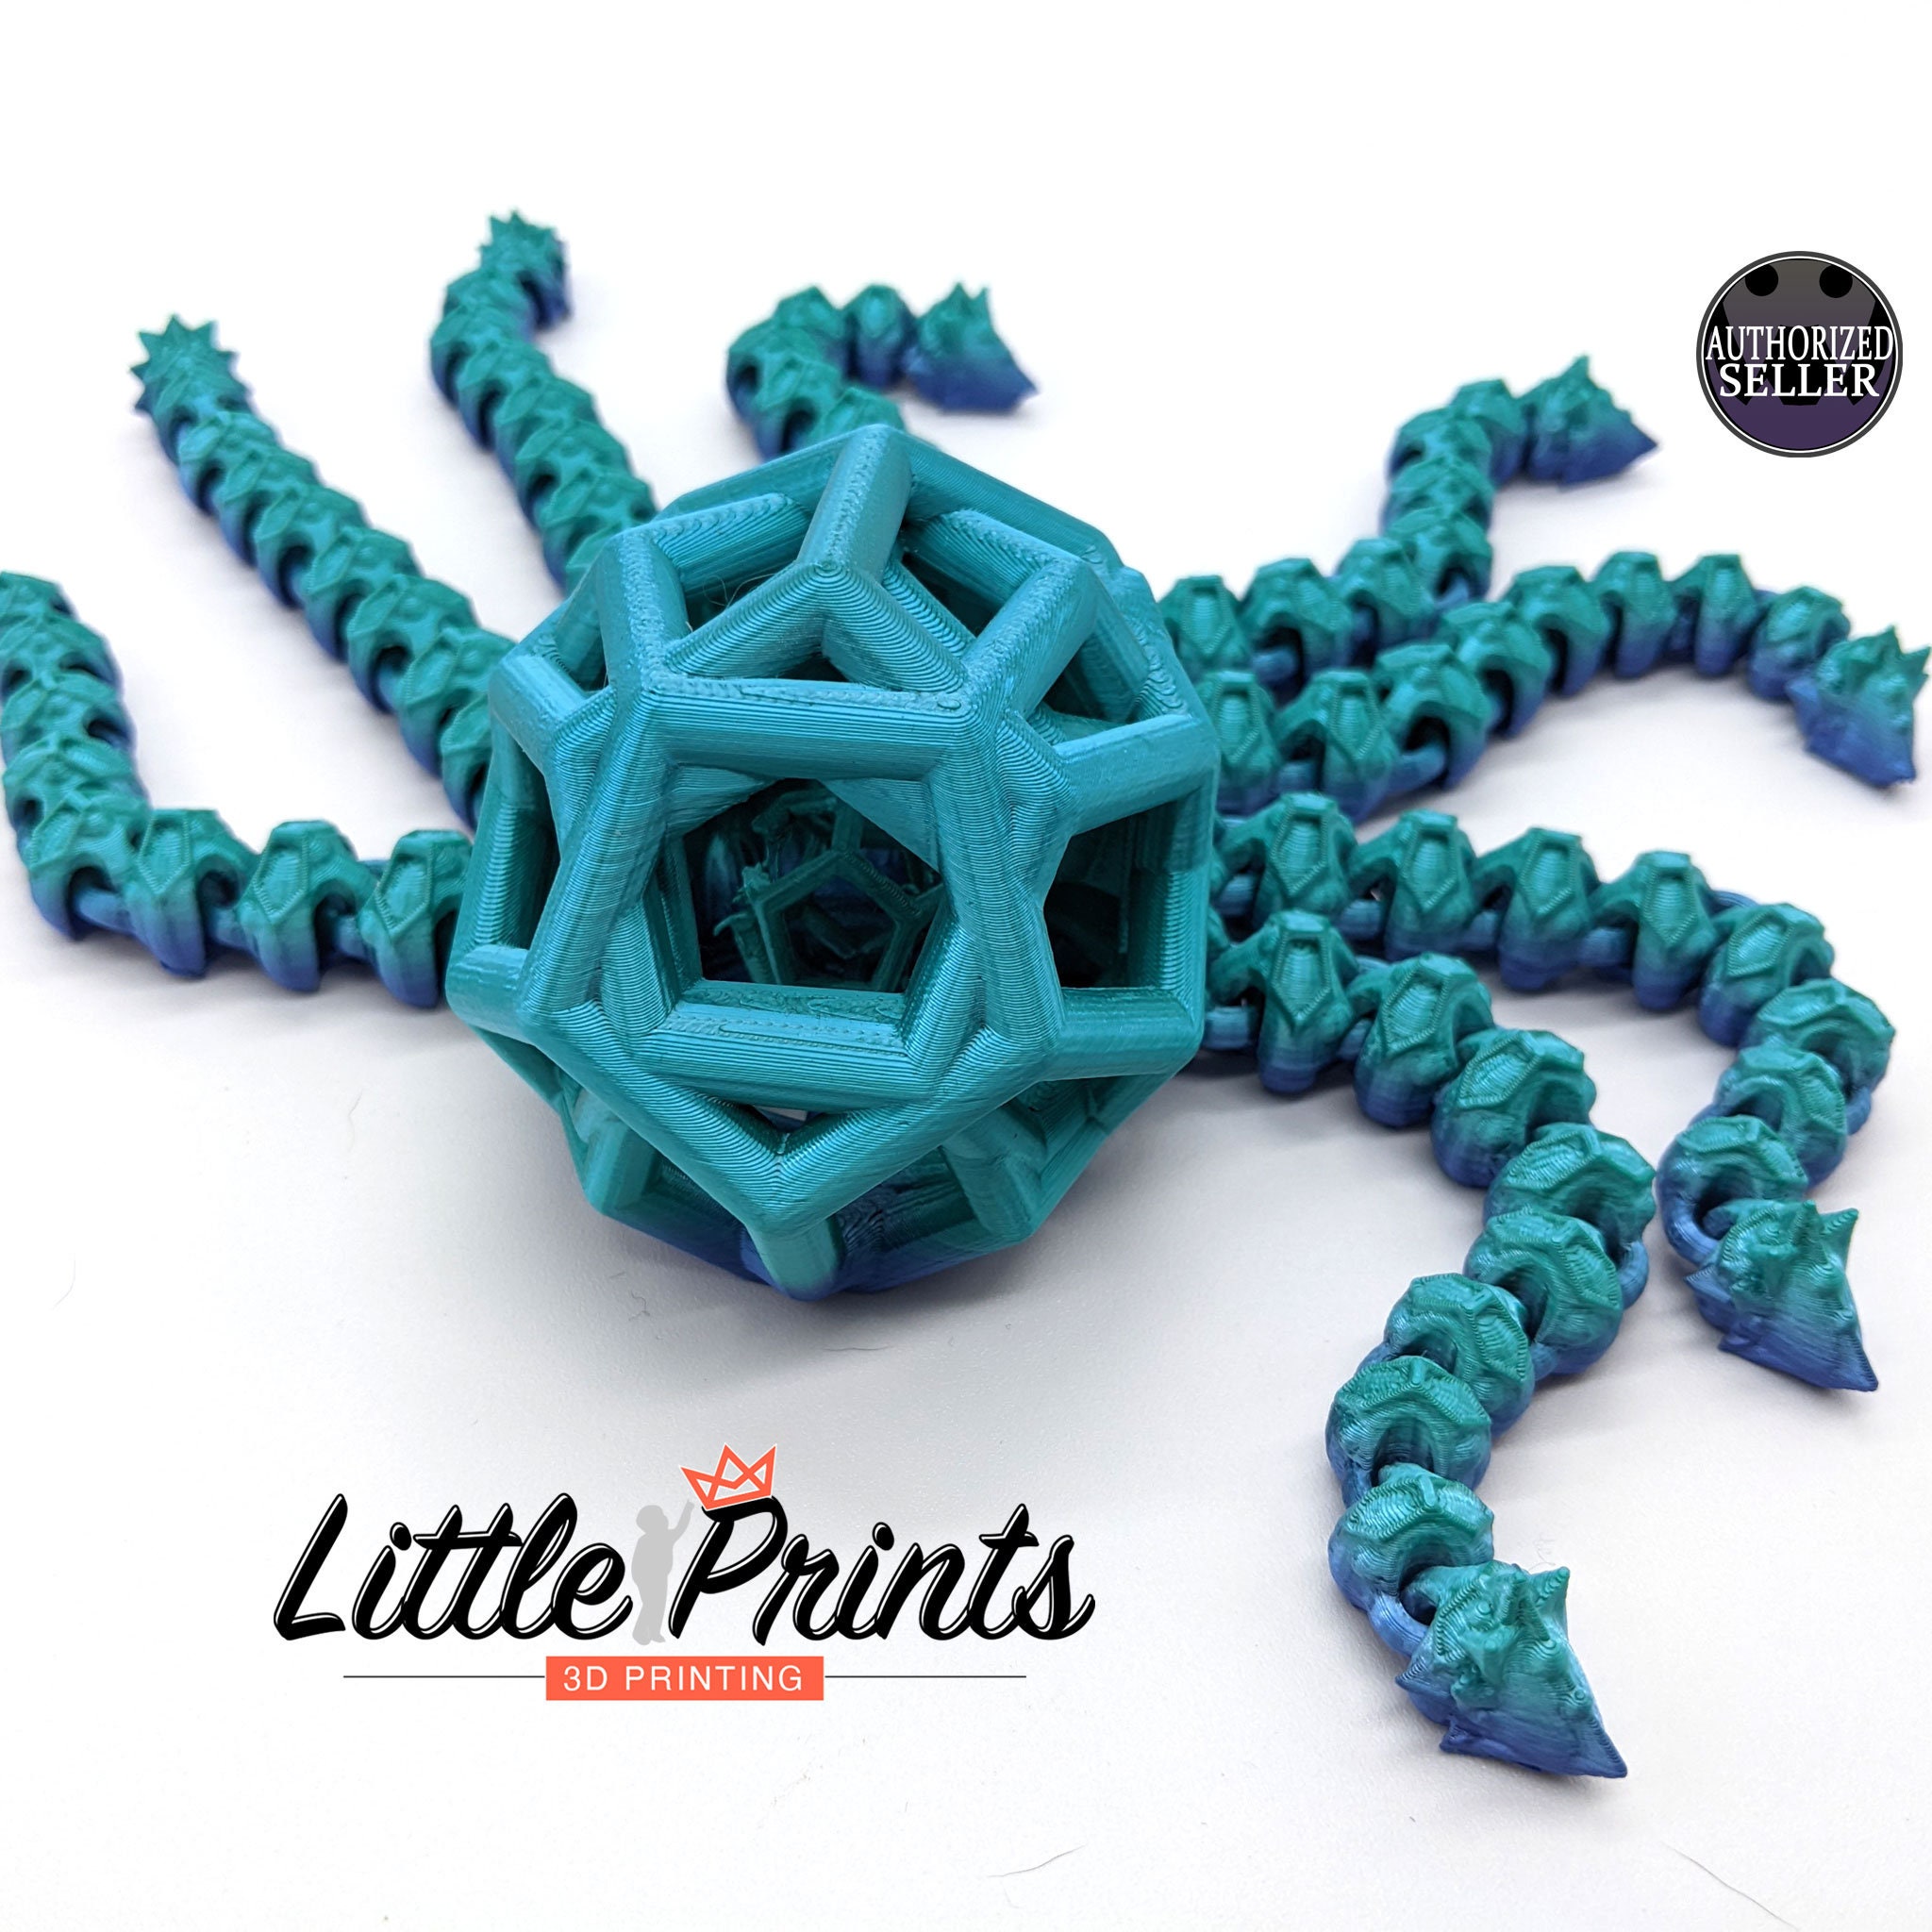 3D Printed Articulating Snake – The Creation Circus